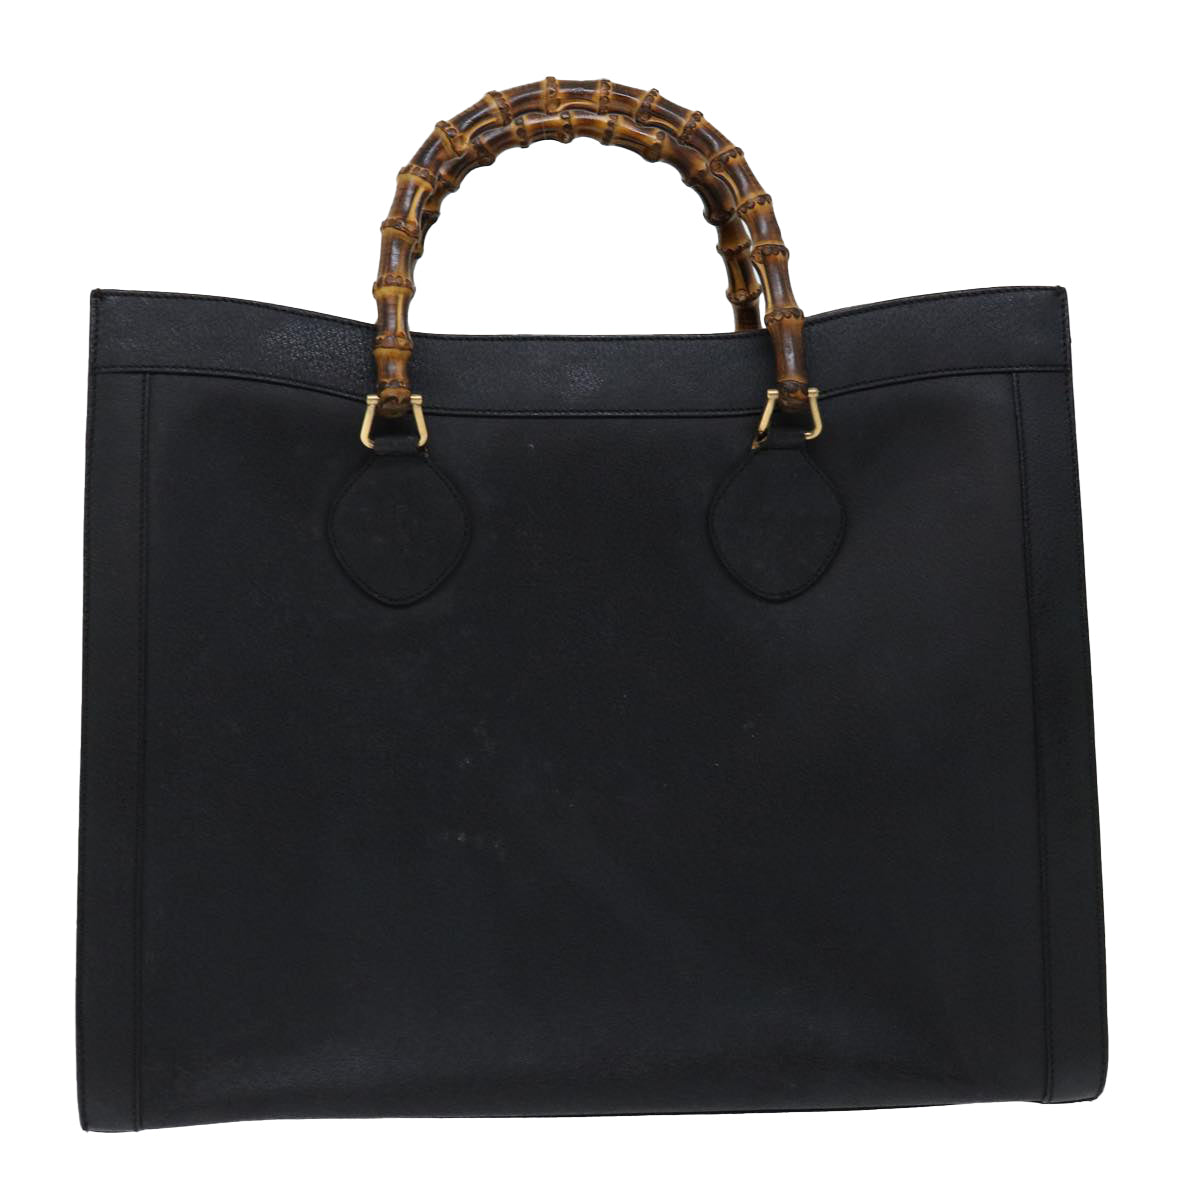 GUCCI Bamboo Tote Bag Leather Black 002 1186 0259 Auth ep3840 - 0